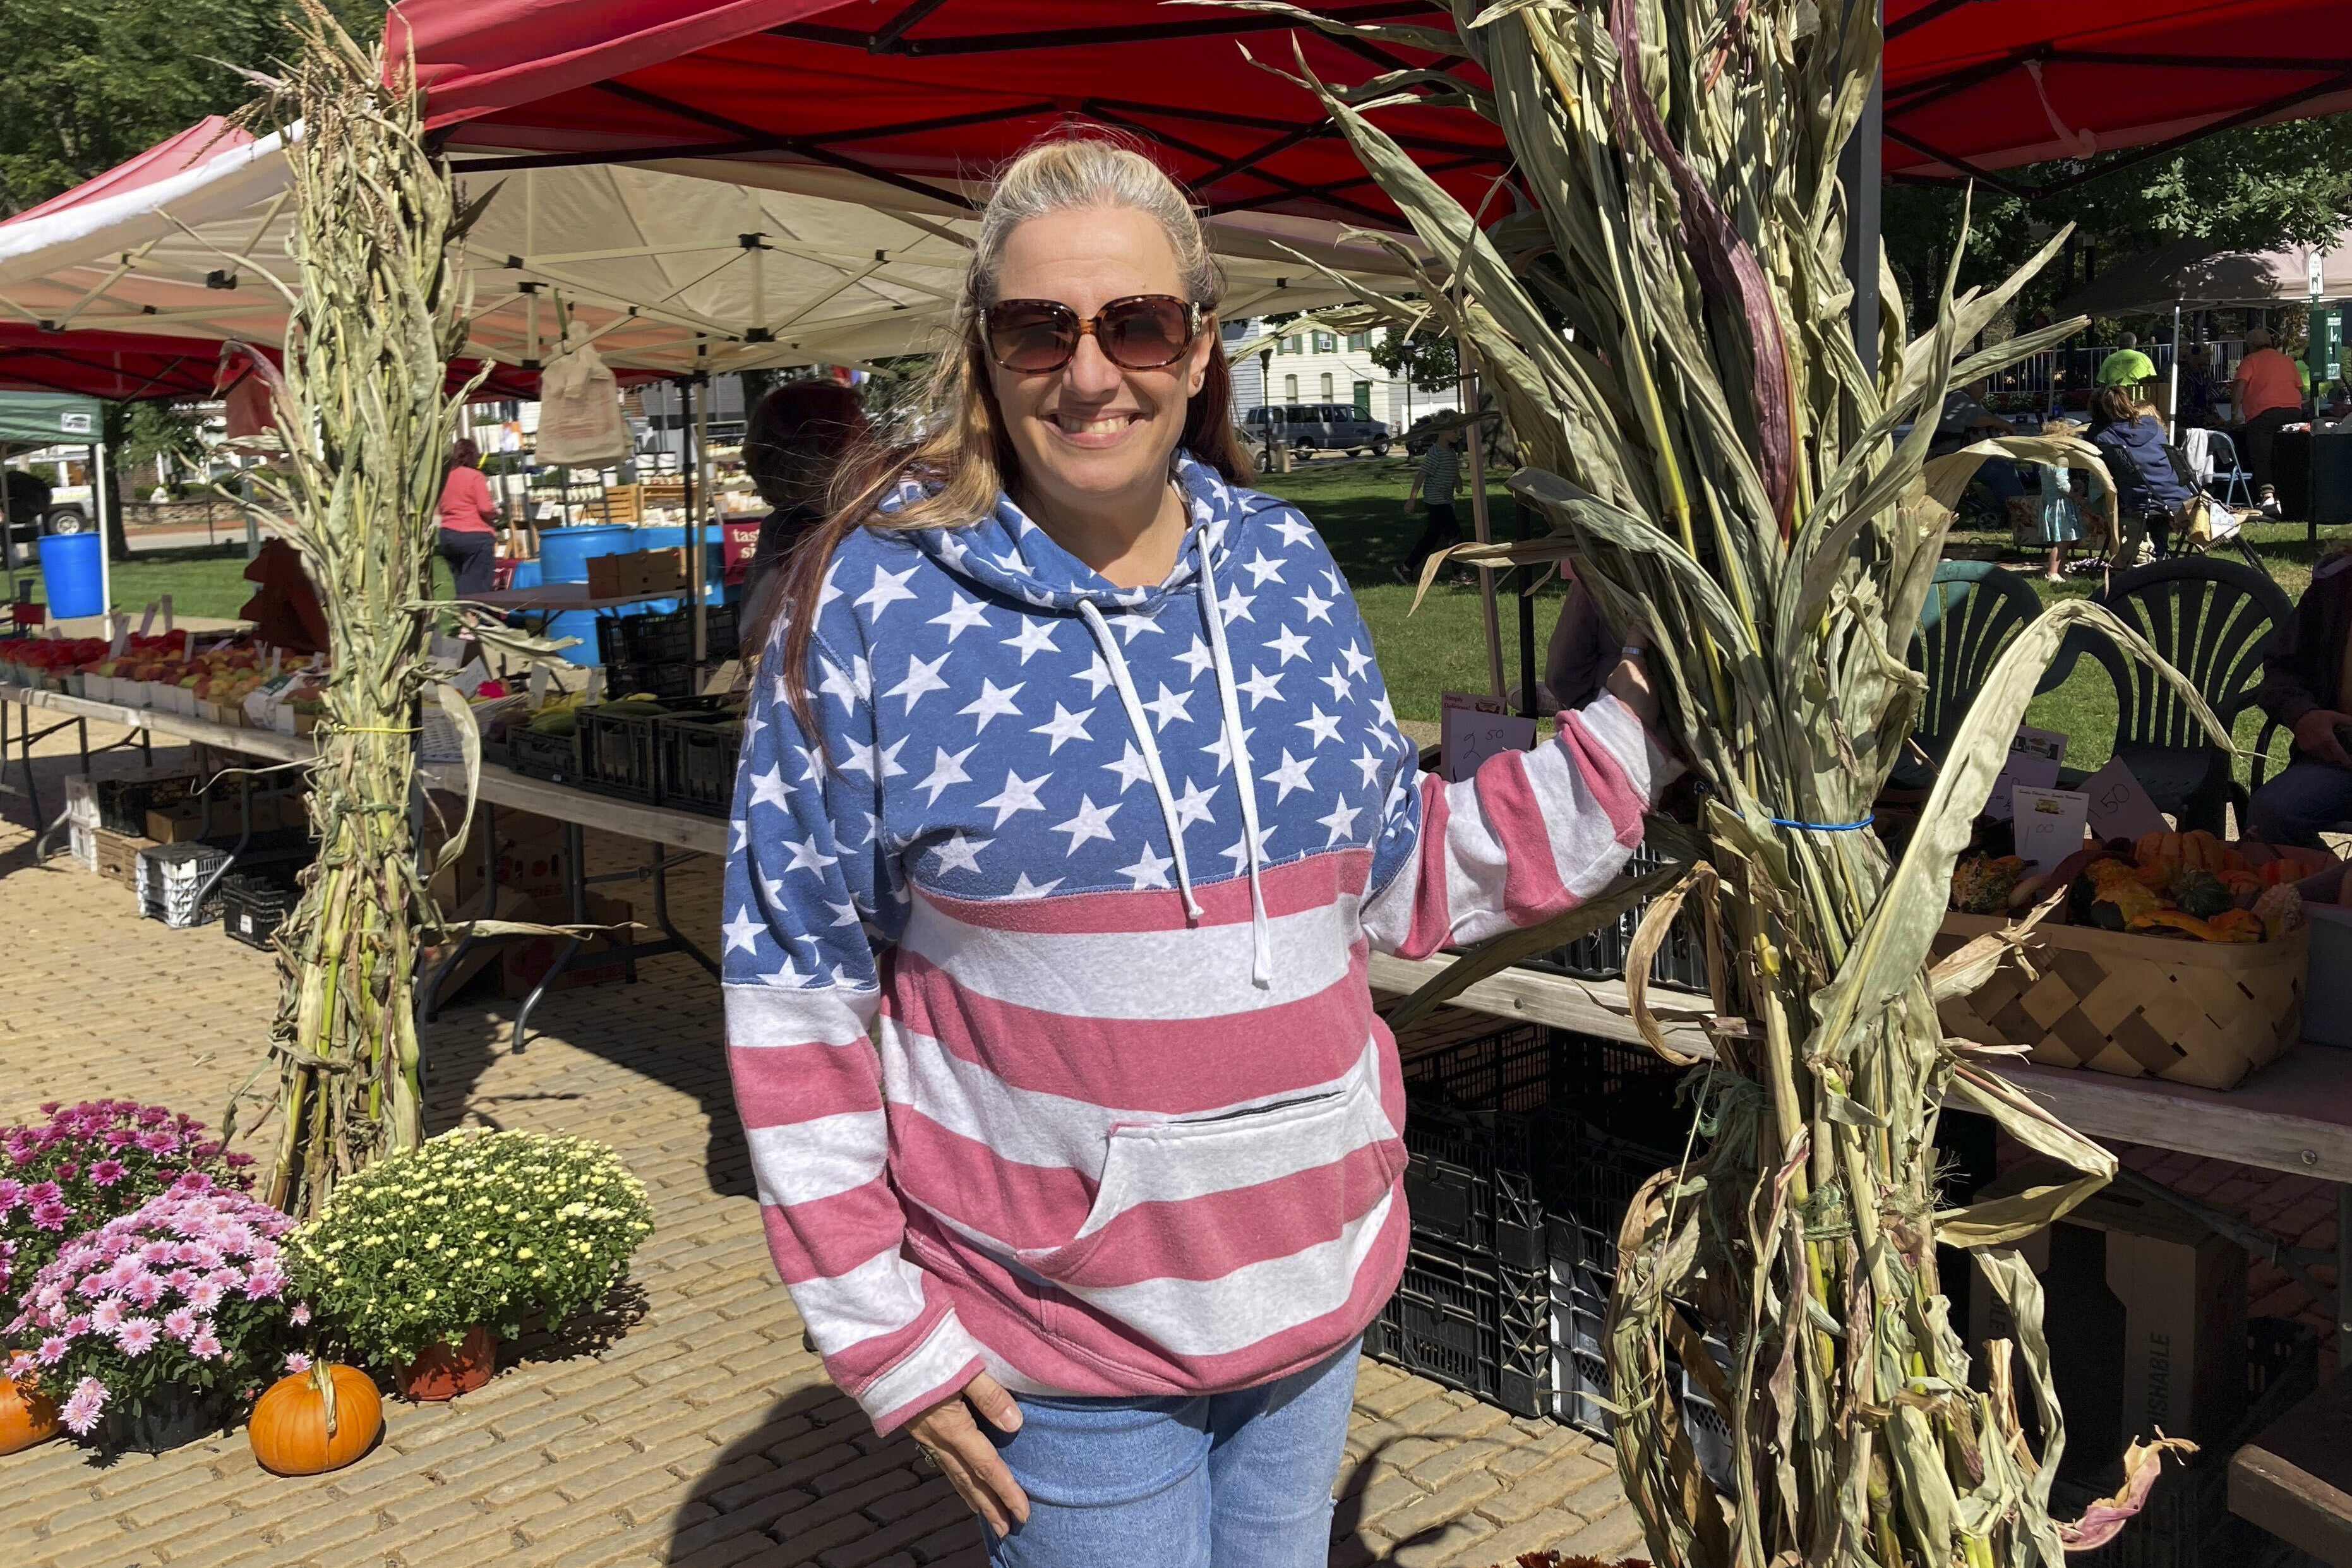 Michelle DeHosse poses for a photo at the farmer's market in downtown Monongahela, Pa., Sept. 23, 2022. DeHosse runs a custom screen-print and embroidery shop on Main Street but said she has had trouble hiring employees since the COVID-19 crisis. While she said just can’t afford the $20 an hour and health care benefits many applicants demand, she understands that many workers need both. “It’s the economy that’s the biggest concern,” she said.